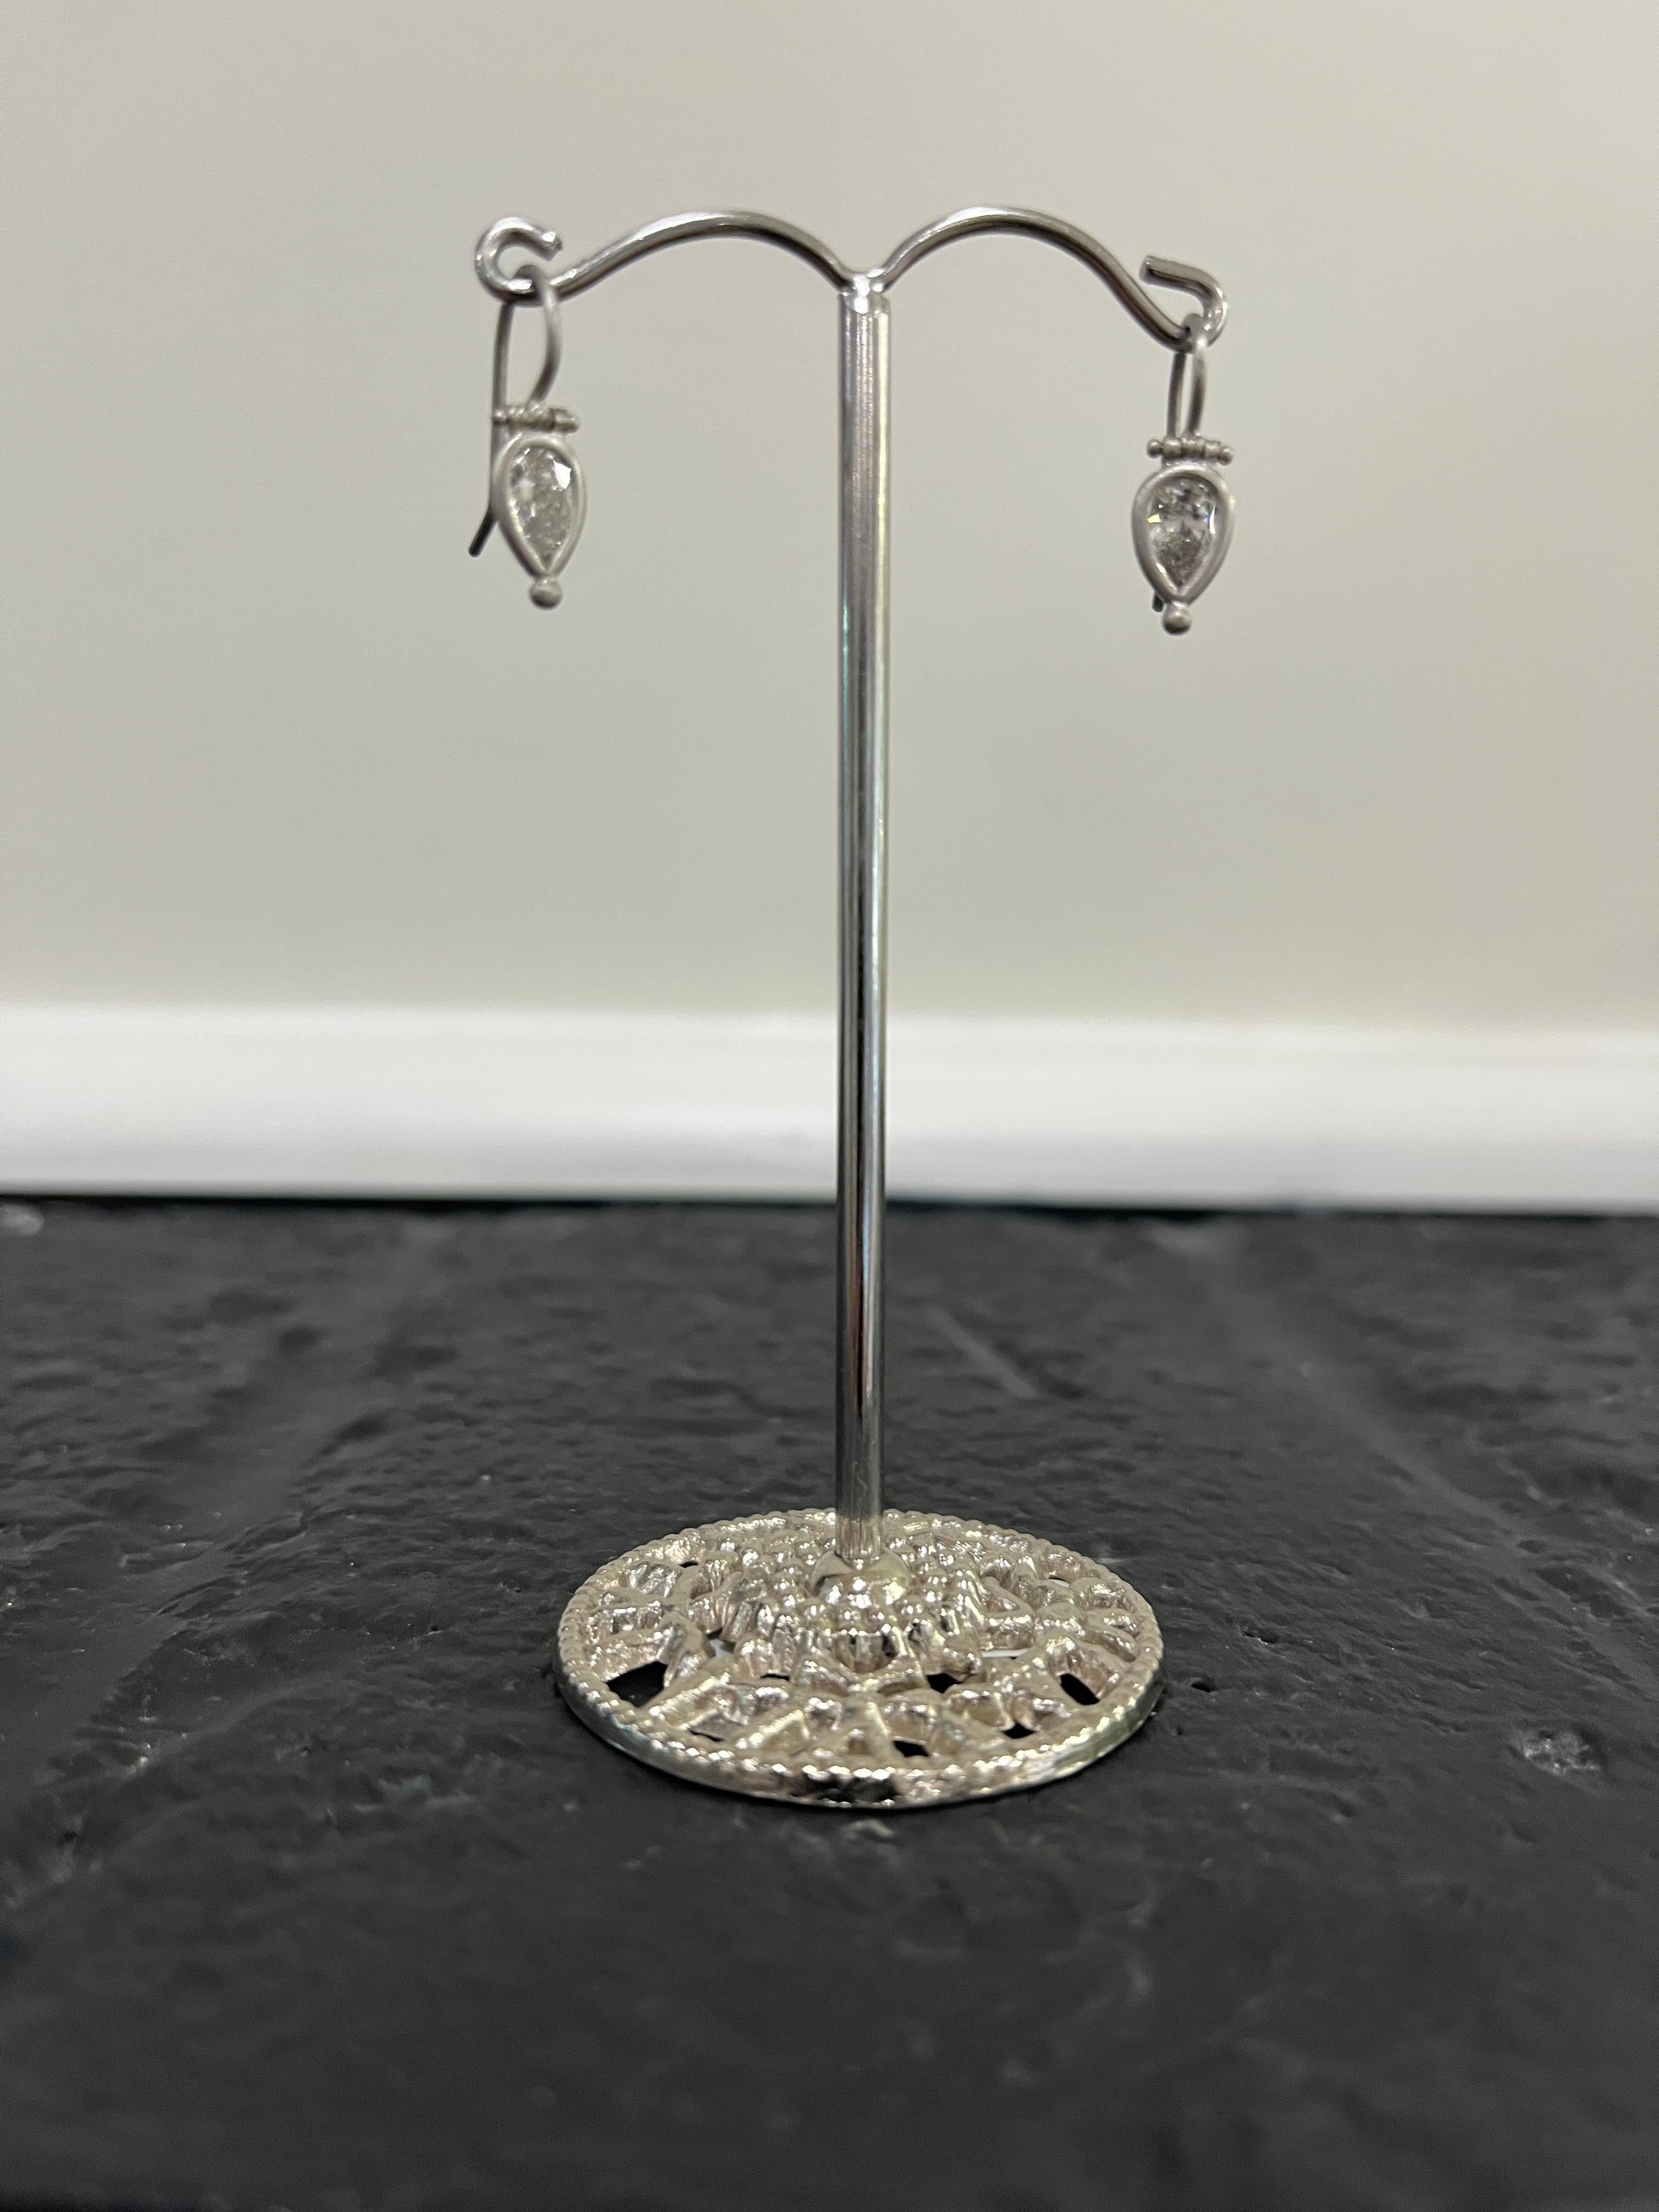 Faye Kim Platinum Pear Shape Diamond Hinge Earrings - the quintessential perfect pair of diamond earrings. Just enough sparkle to get noticed but with understated elegance. The hinge detail provides movement and the bezel setting makes the diamonds